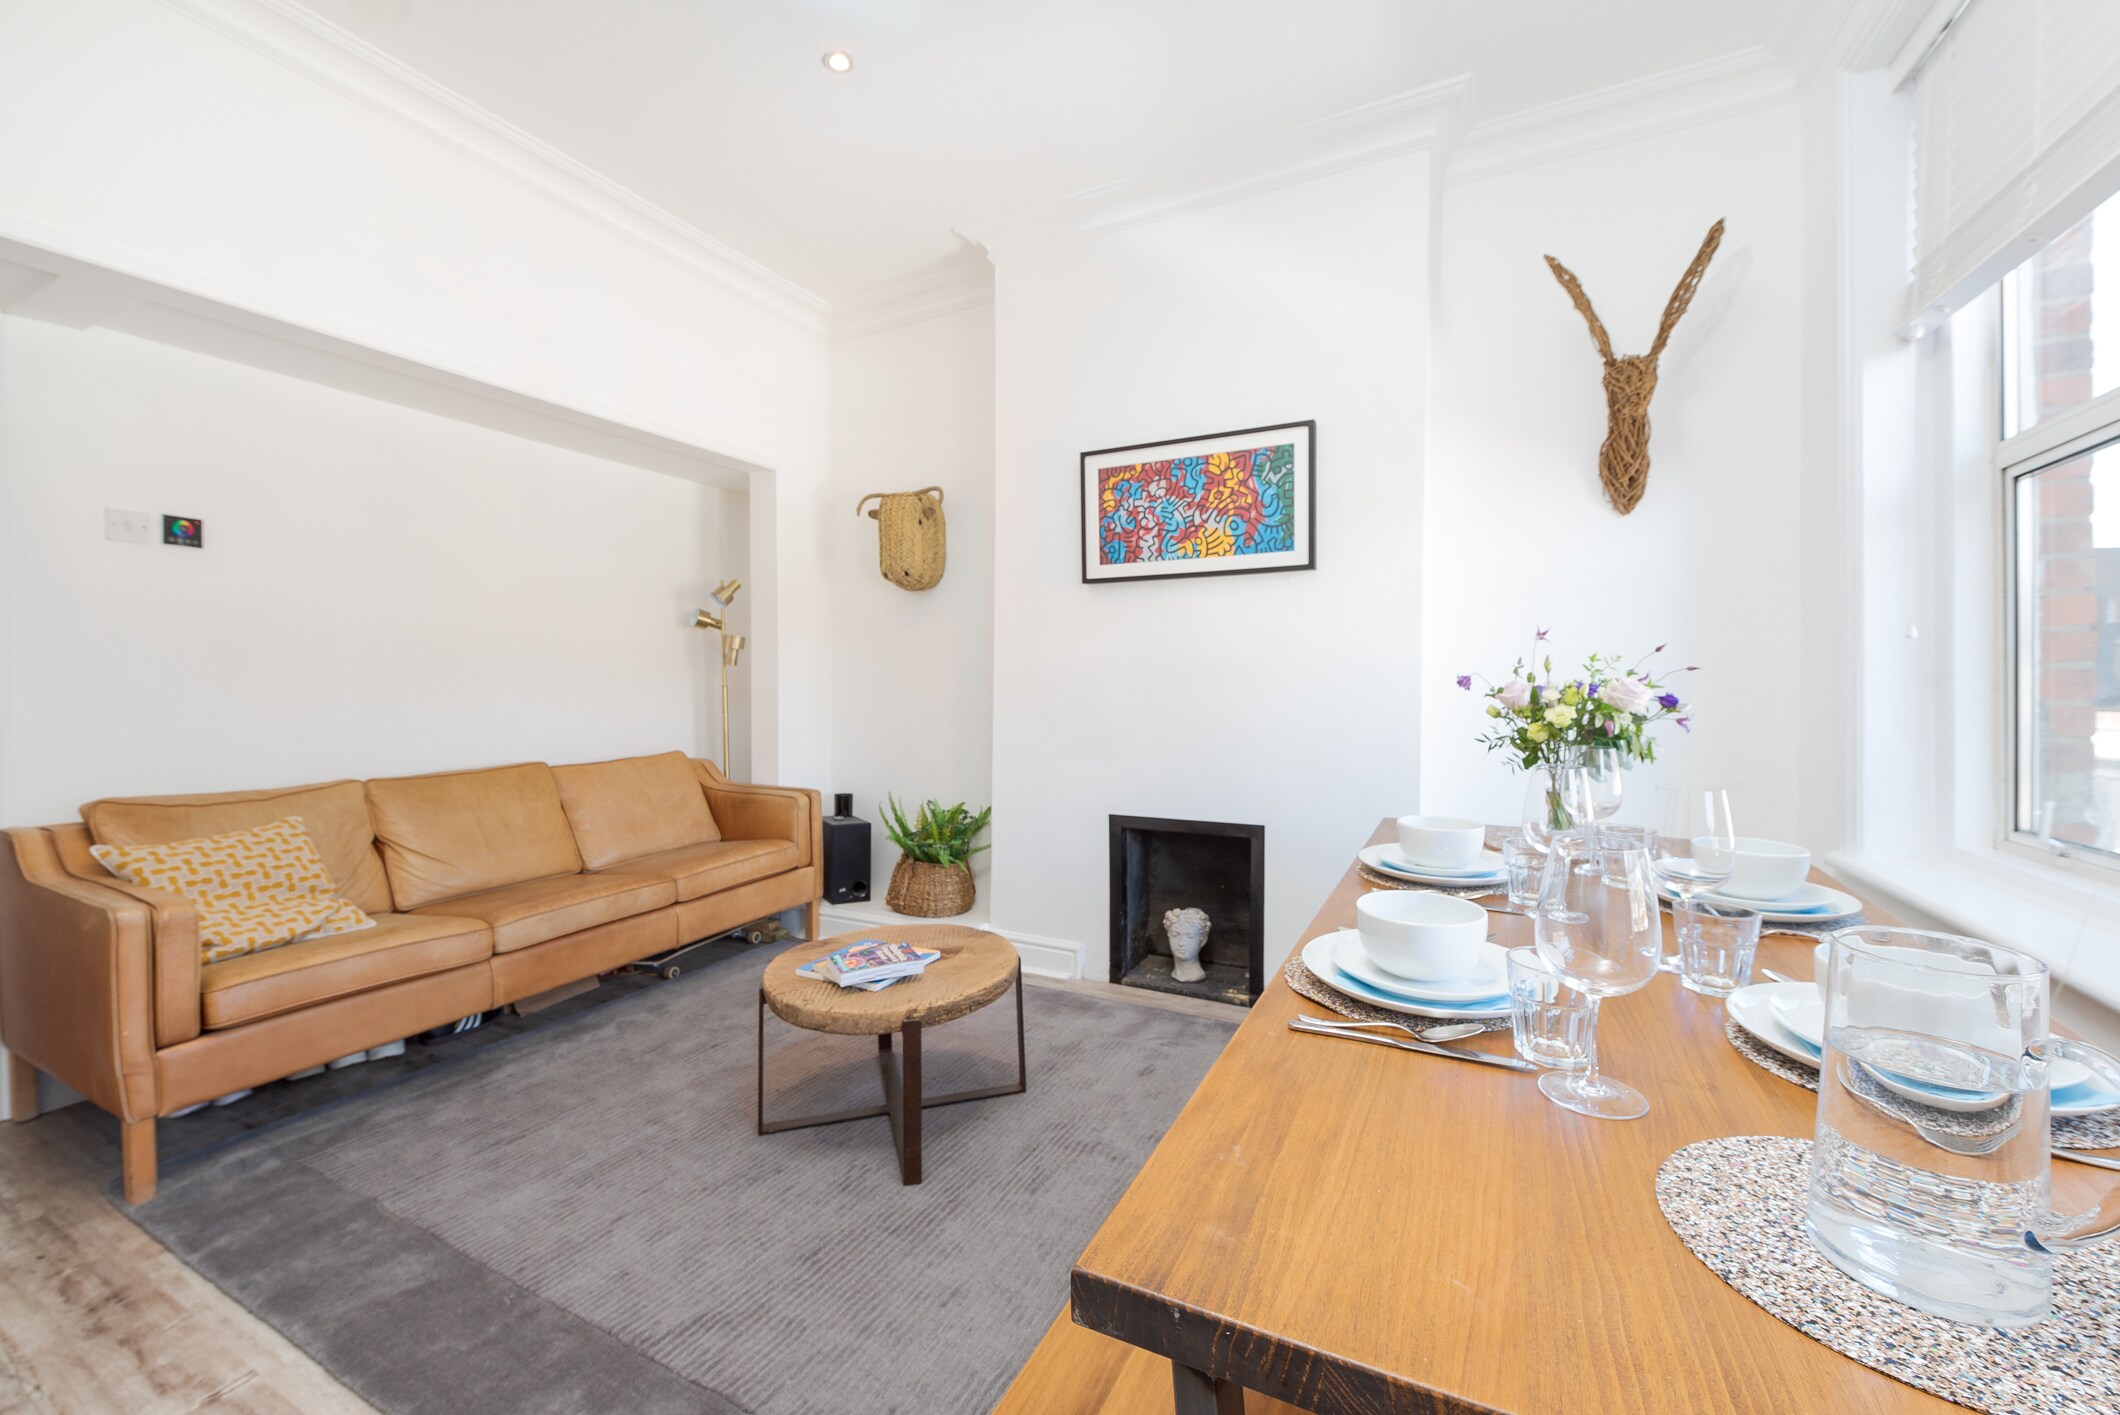 Property Image 1 - Bright two bedroom flat in fashionable Fulham